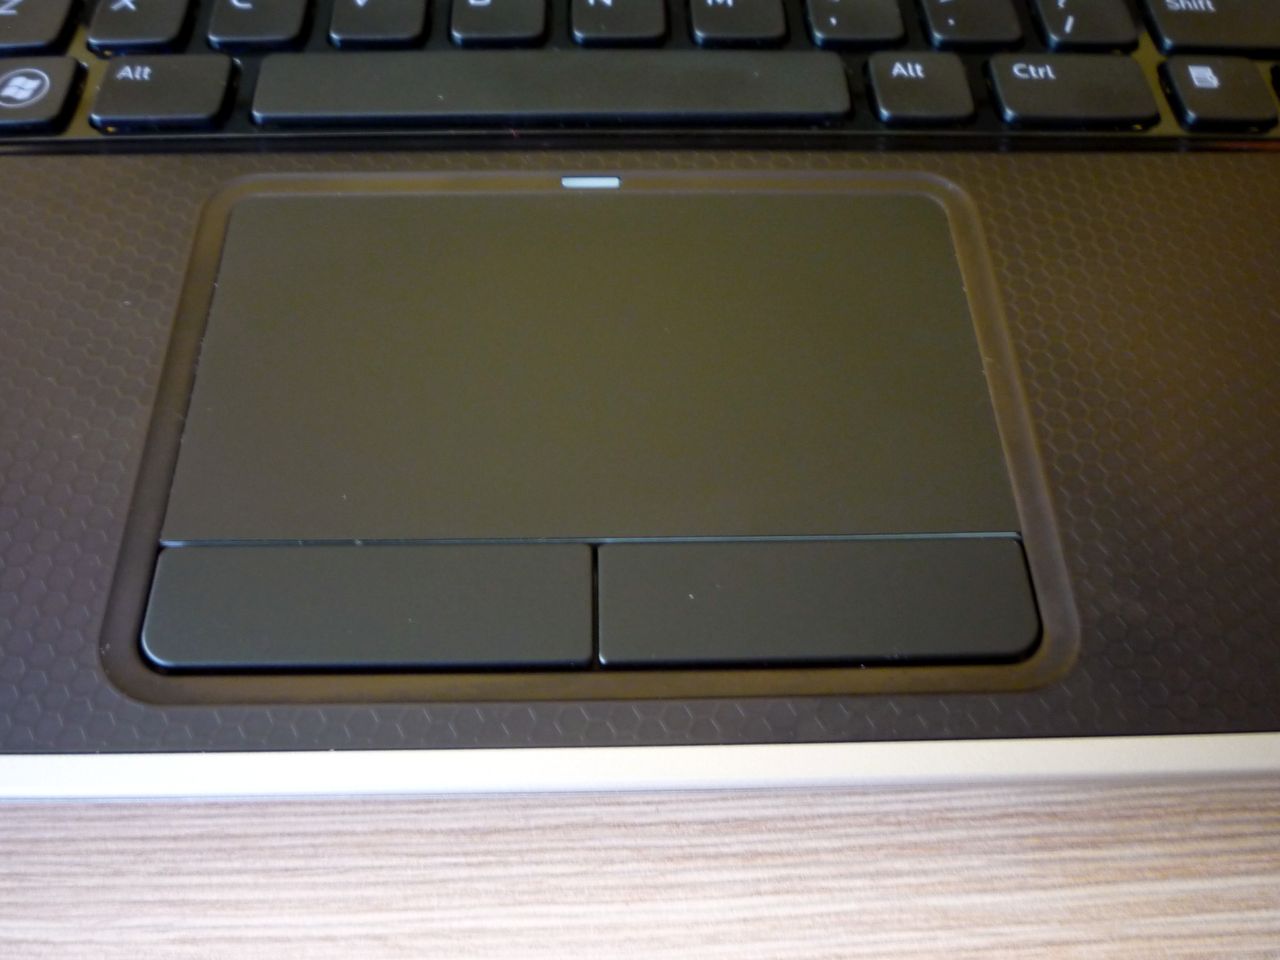 Dell Inspiron 15R Special Edition (7520) - touchpad